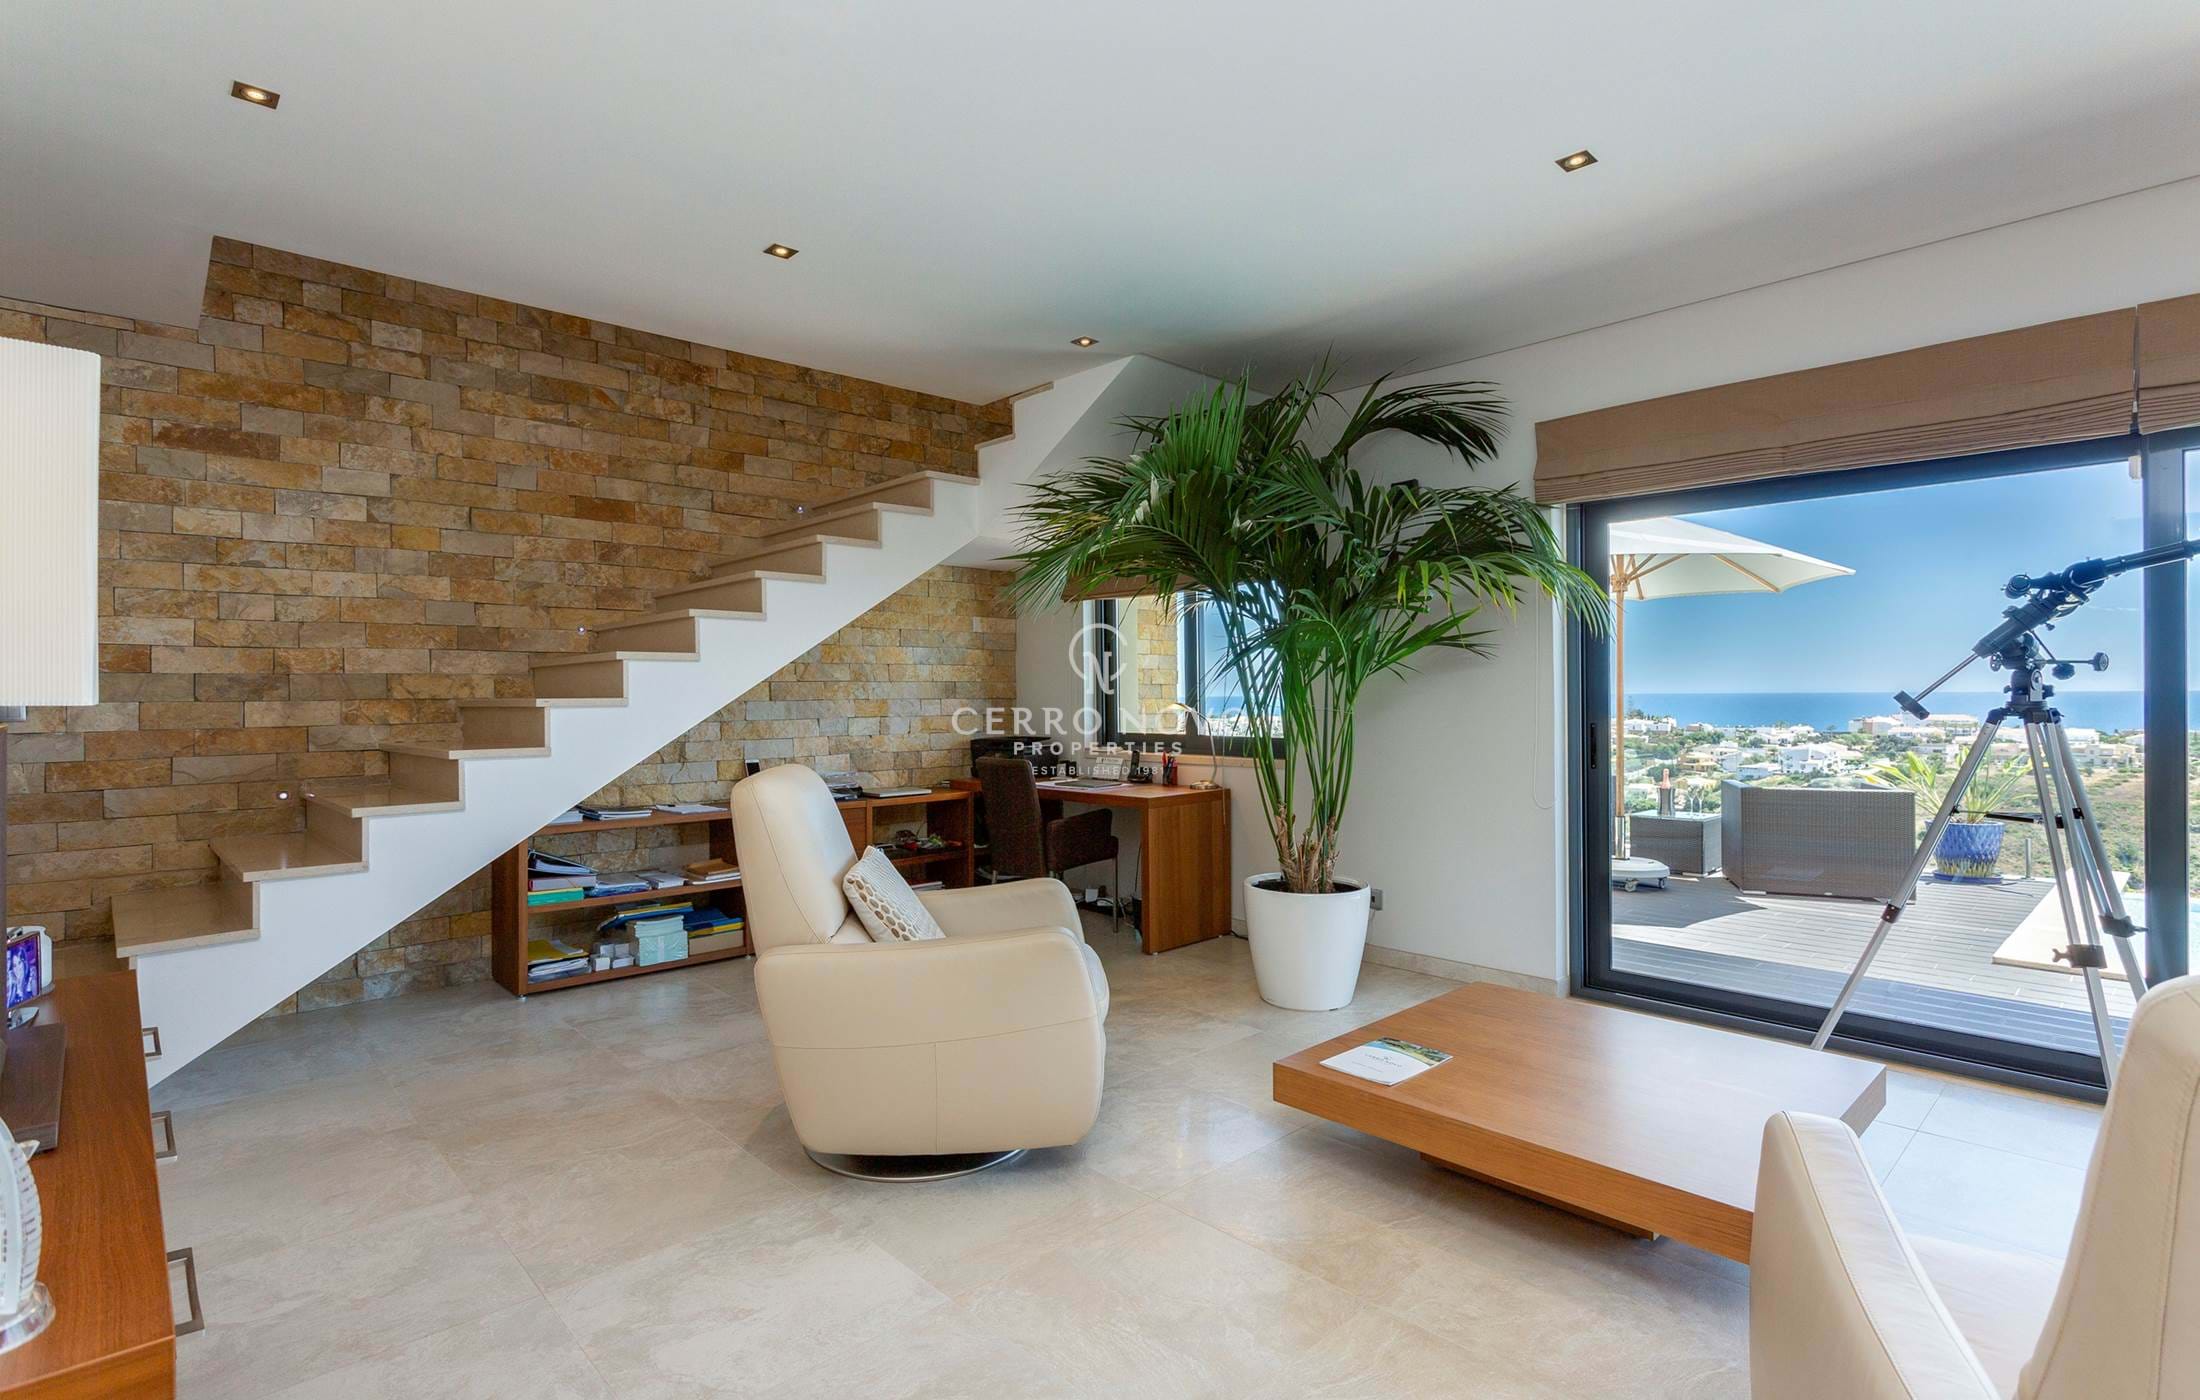 Contemporary cliff top villa with stunning sea views